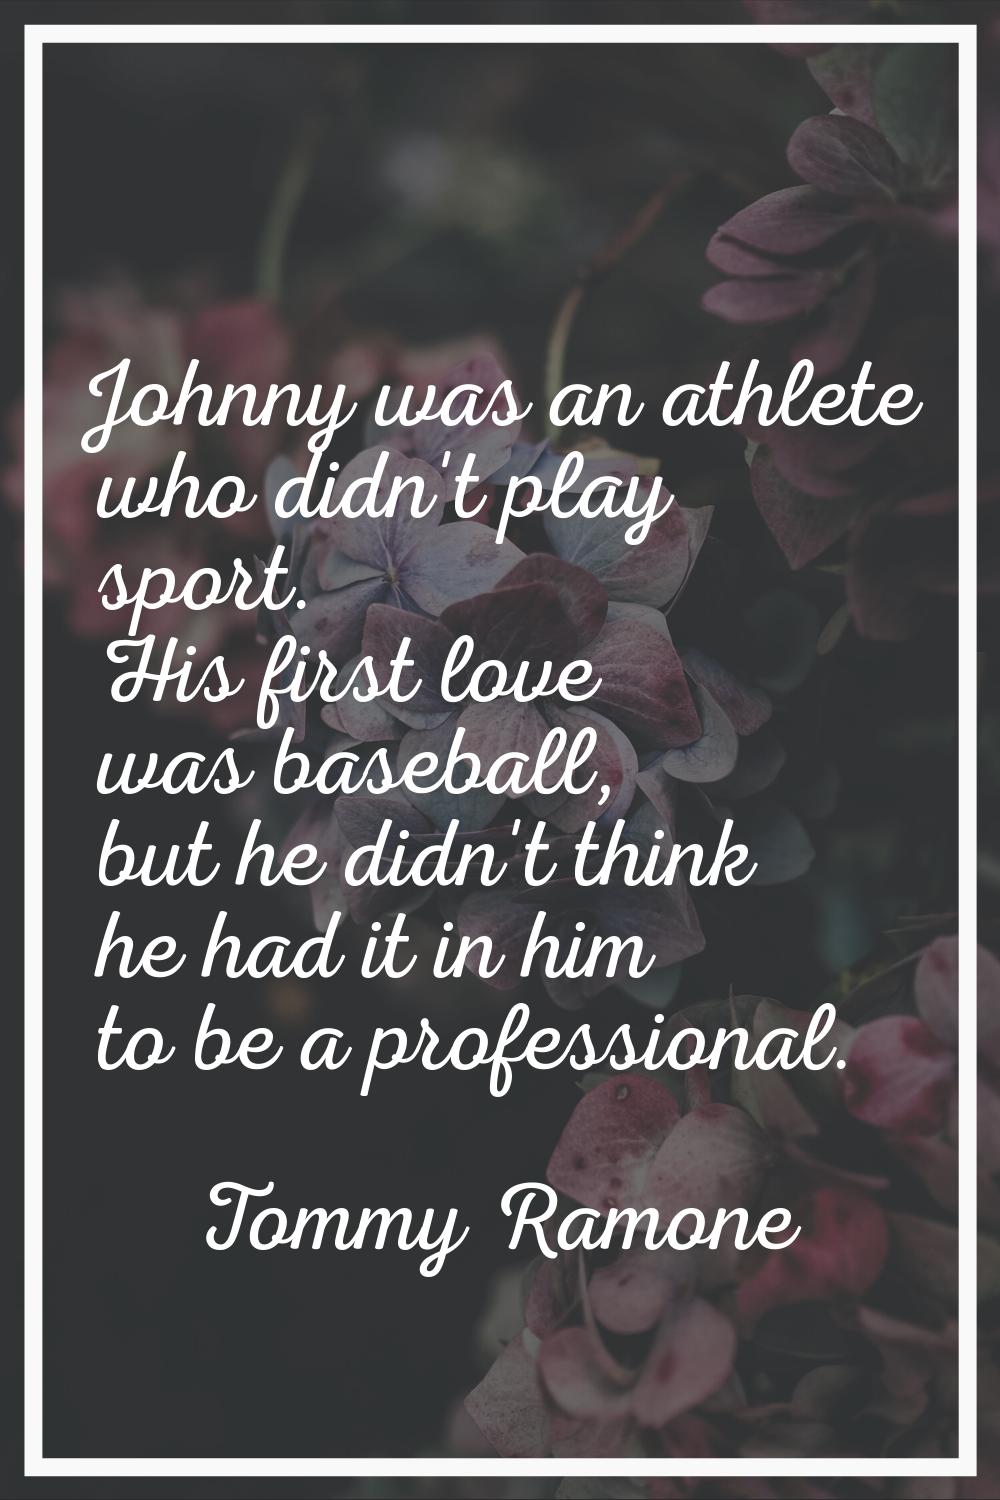 Johnny was an athlete who didn't play sport. His first love was baseball, but he didn't think he ha